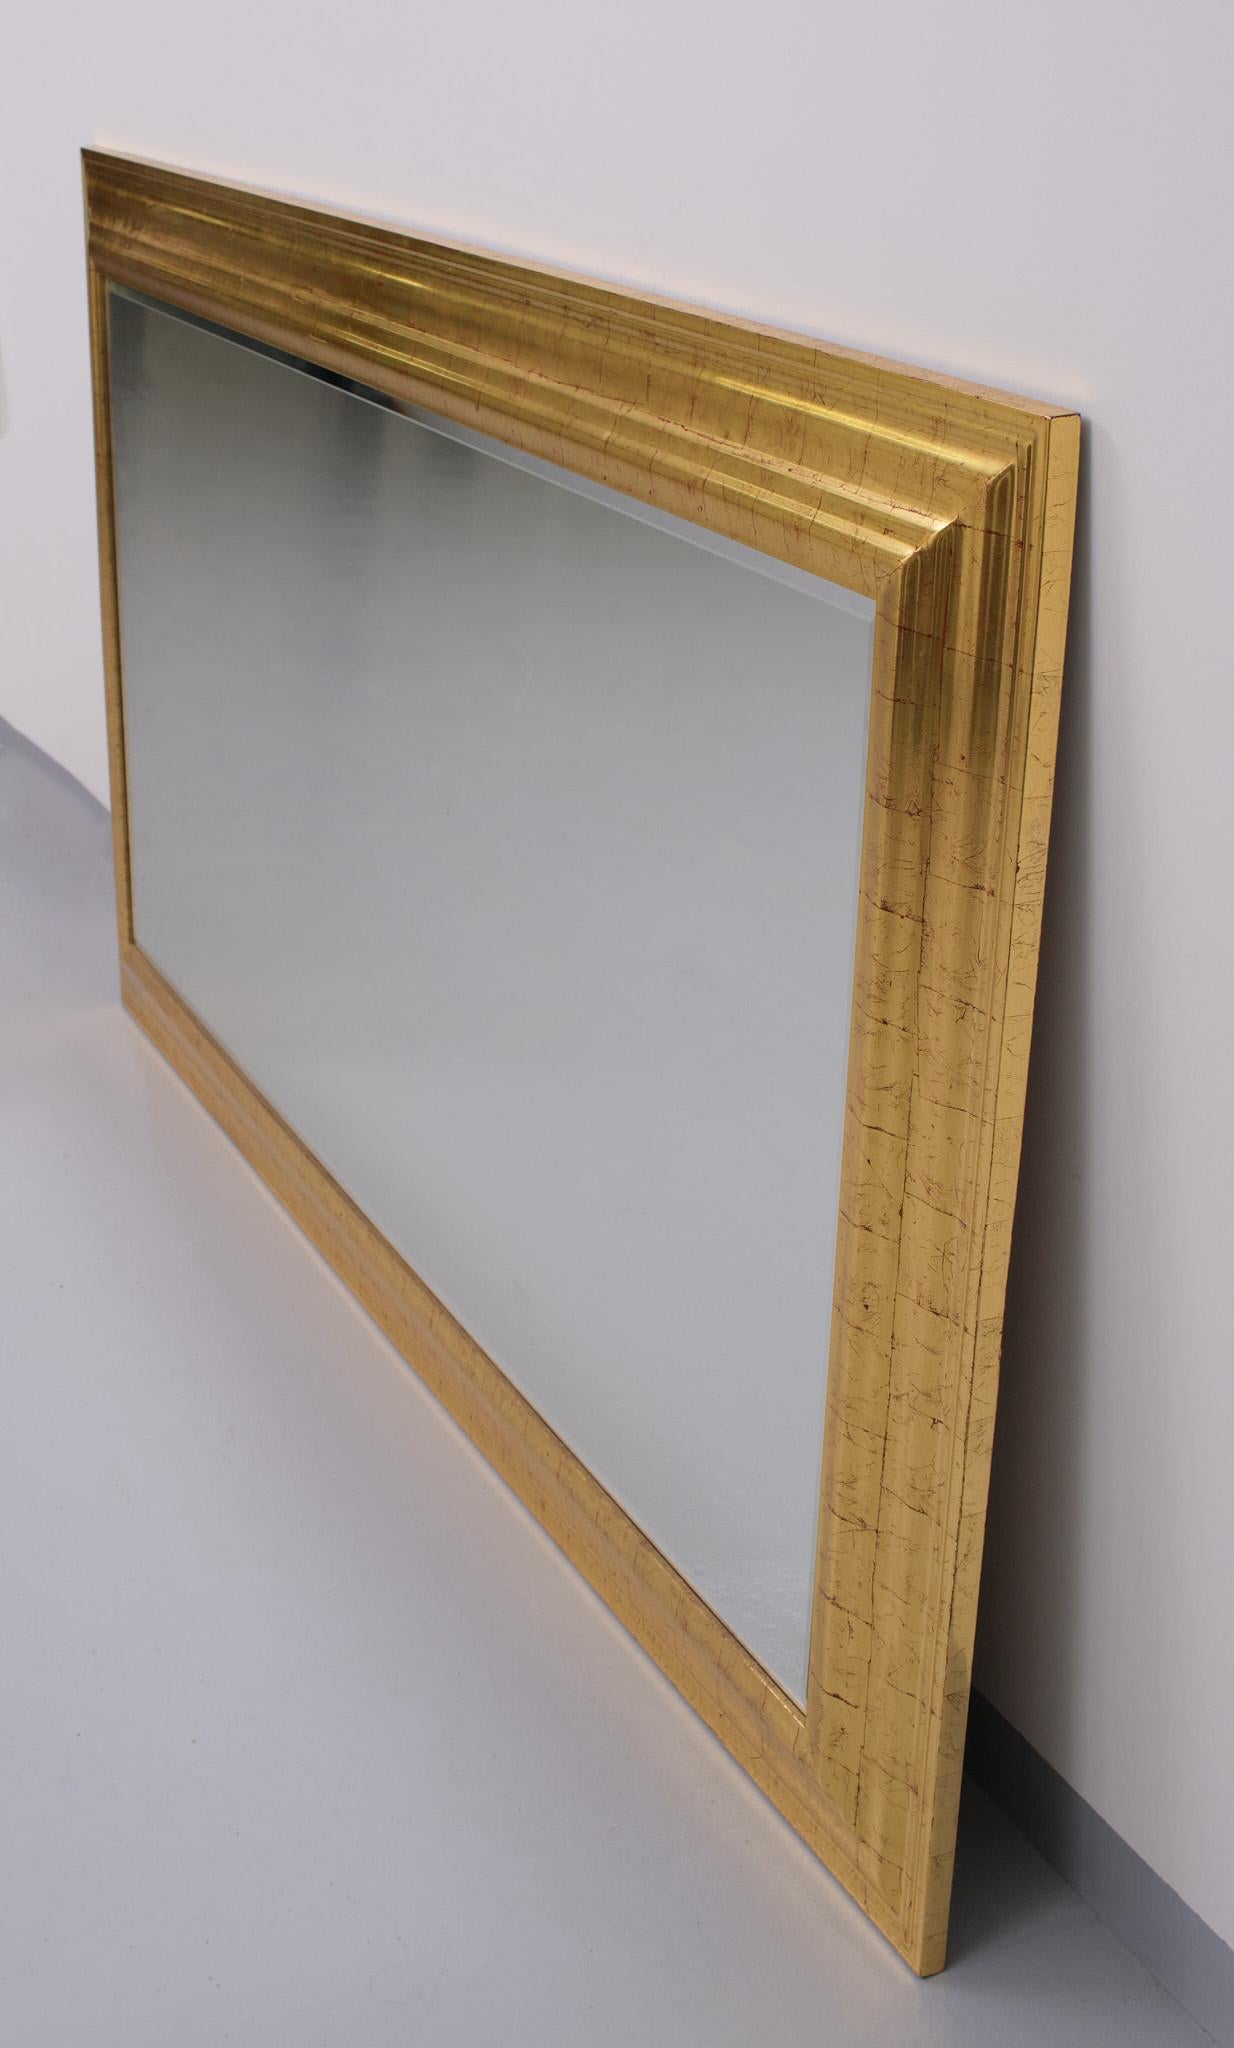 Large Deknudt Gold Wall Mirror 1970s Regency  In Good Condition For Sale In Den Haag, NL